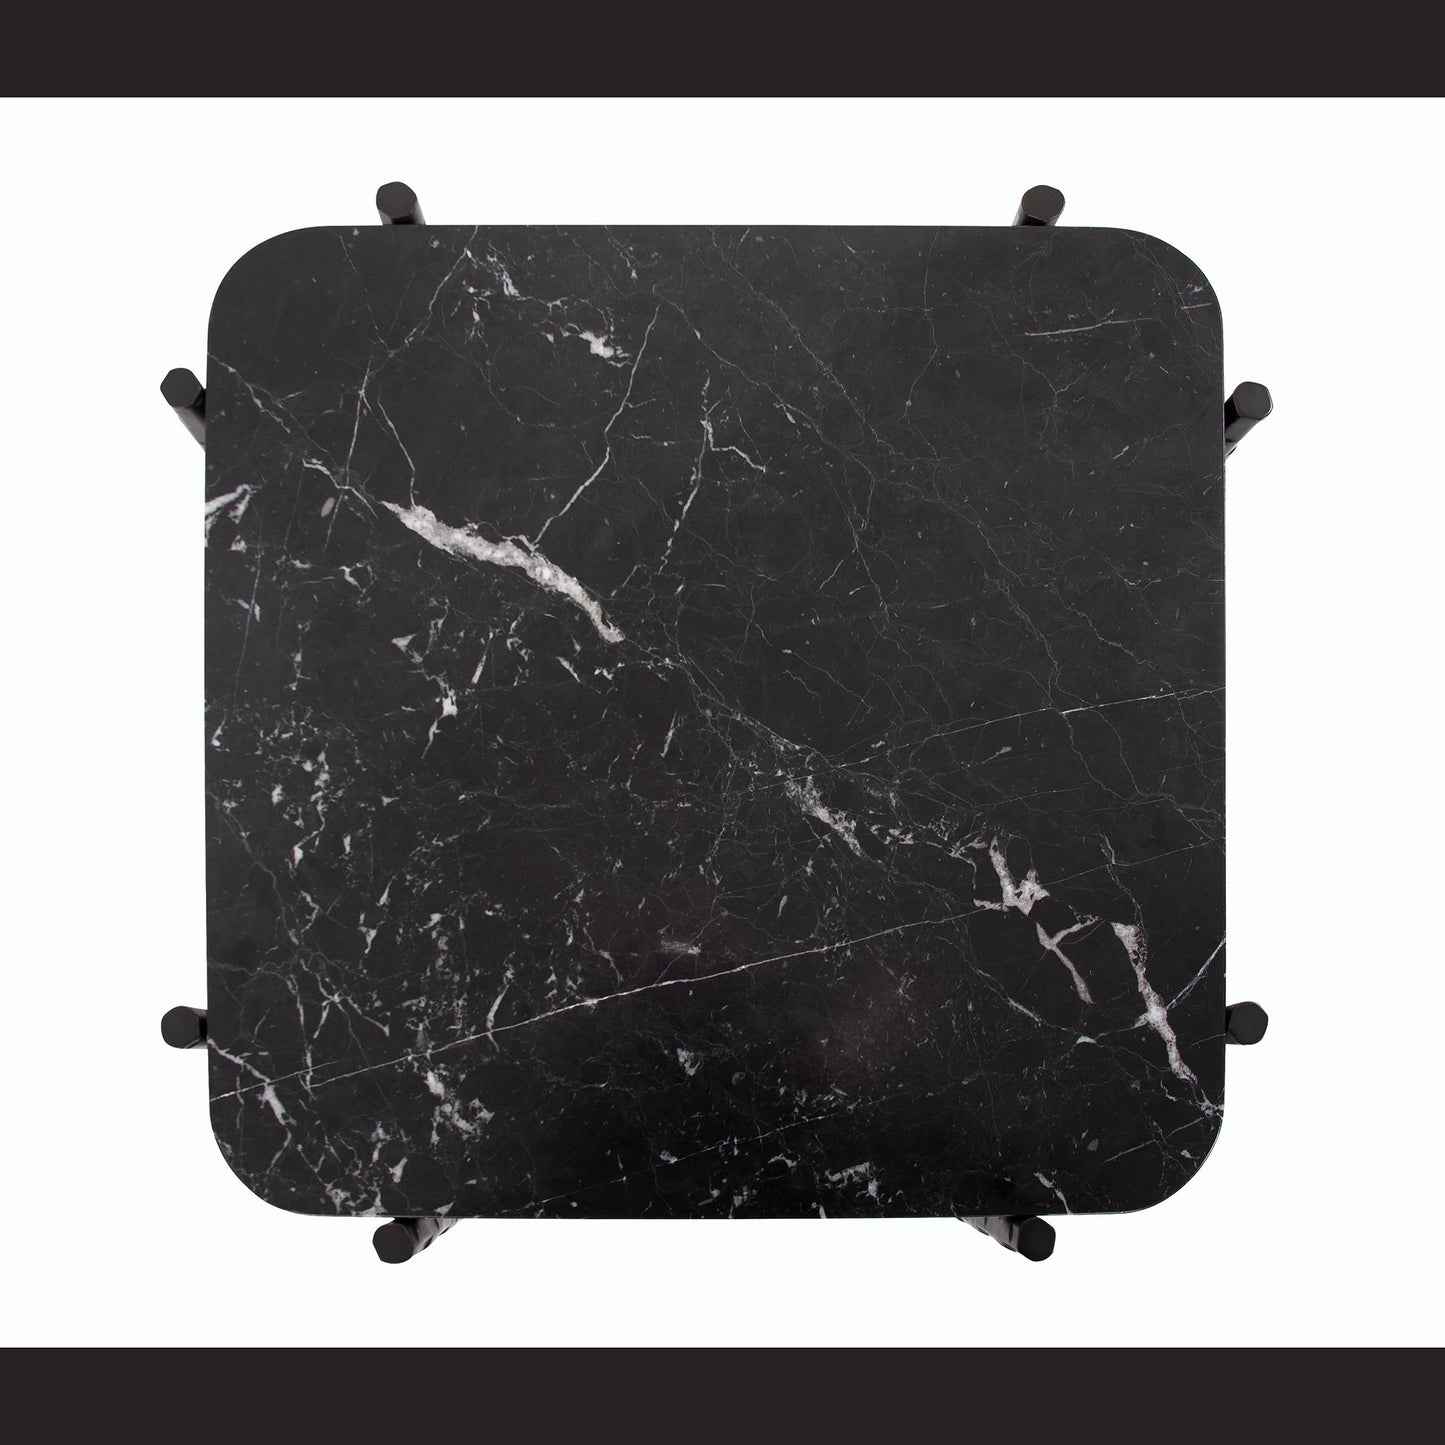 Byron Black Marble Top Side Table